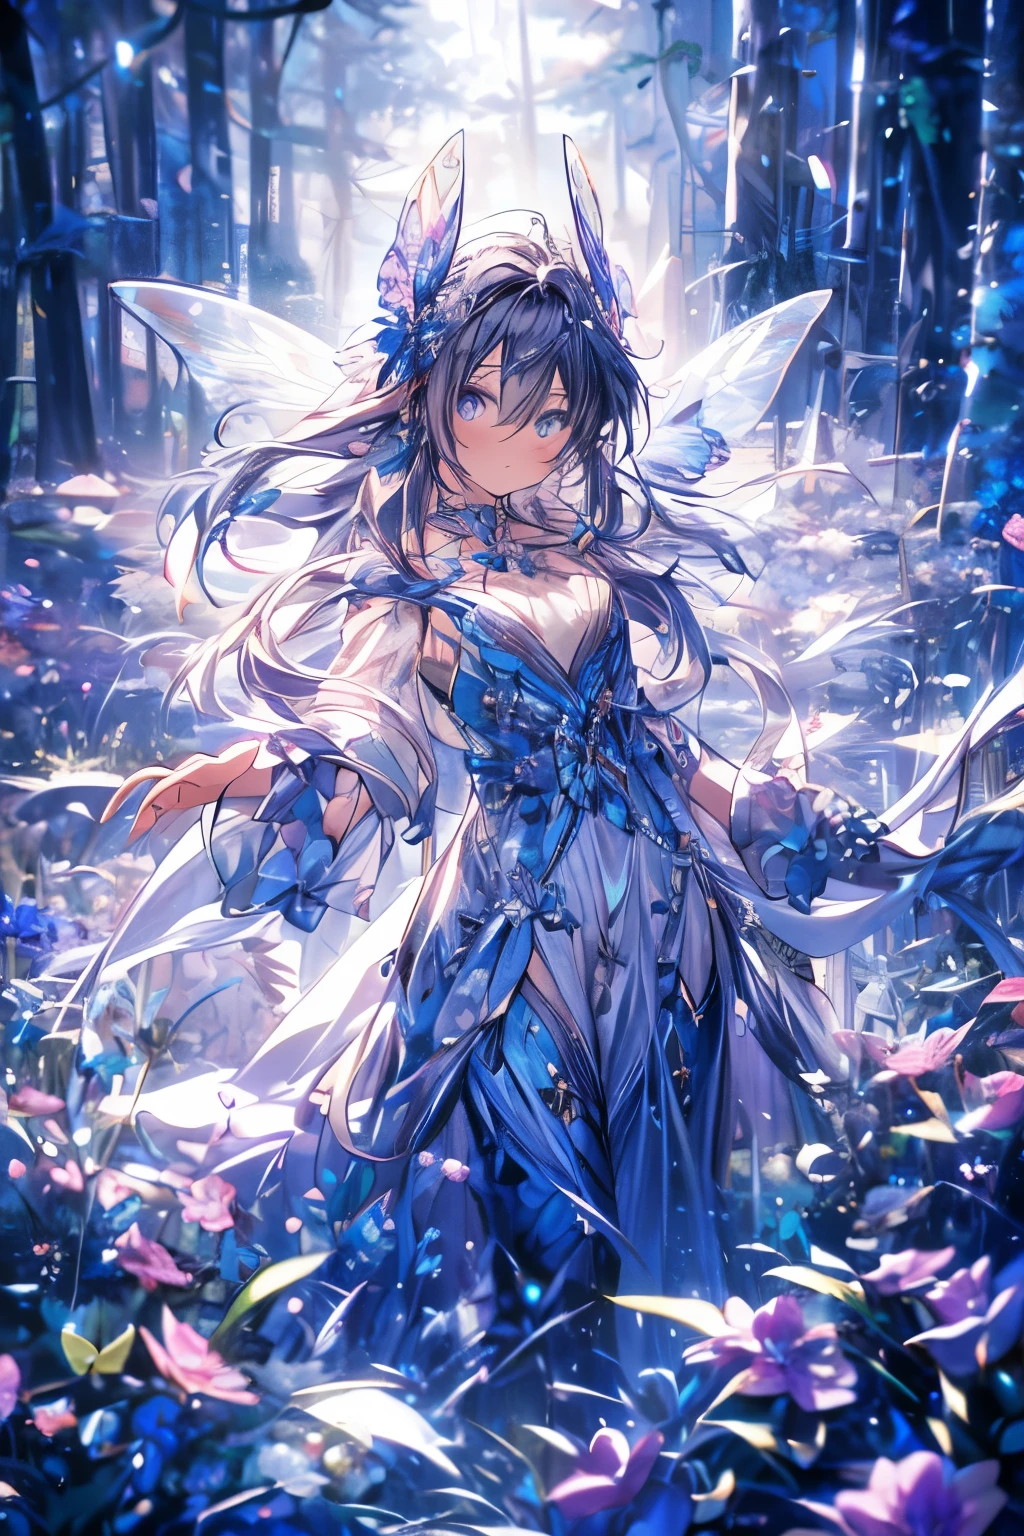 masterpiece, concept art, (highly detailed), medium shot, fairy butterfly 1girl, butterfly wings, cute, elegant, violet flowing hair, magical dress, magnum opuutterfly:1.5) flying surrounding her, mythical forest, bathed in ethereal moonlight, serenity, (epic composition, epic proportion), Vibrant color, volumetric lighting, Hd